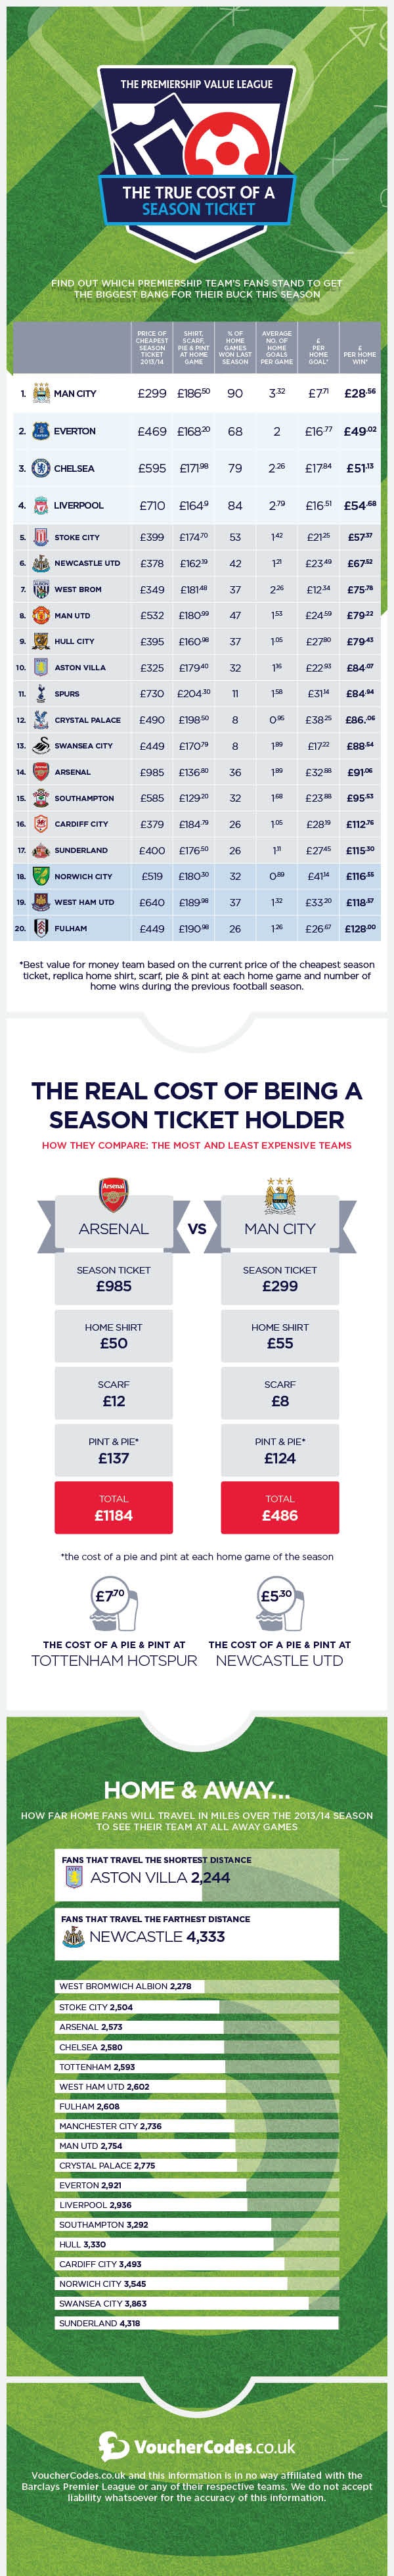 An infographic showing the Premiership Value League Table by VoucherCodes.co.uk